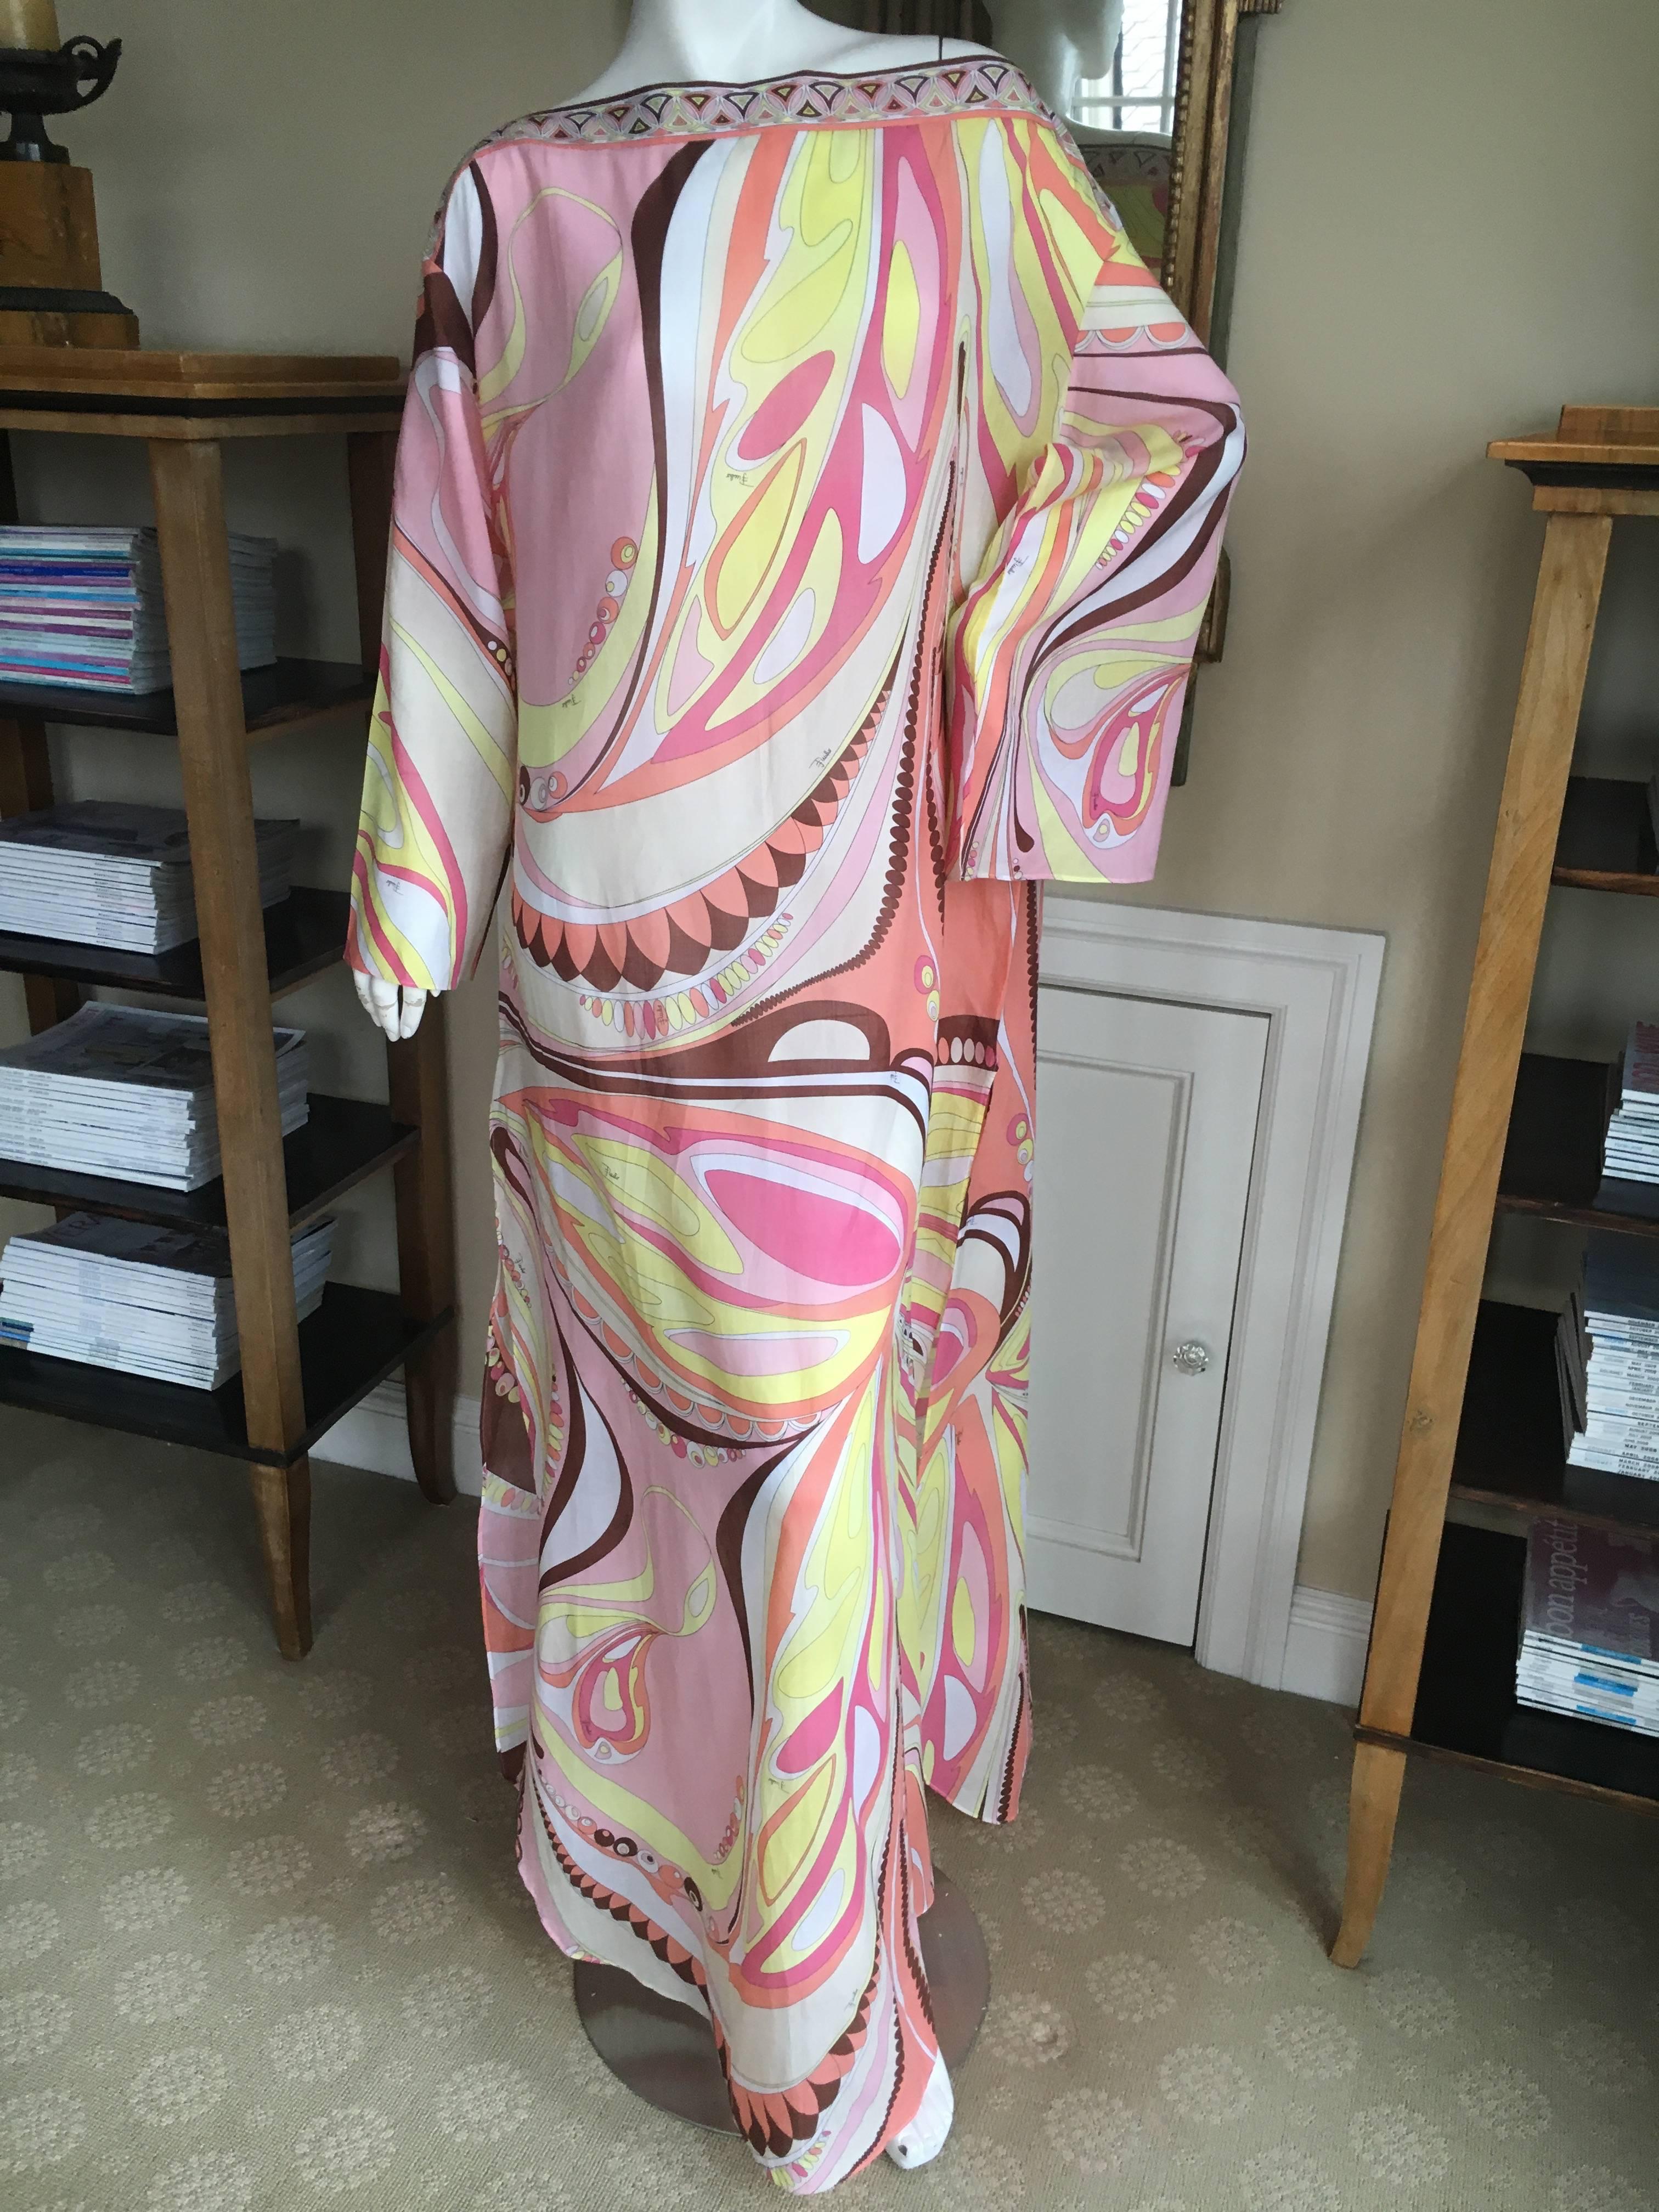 Emilio Pucci Sheer Cotton Beach Cover Caftan with Batteau Neckline In New Condition For Sale In Cloverdale, CA